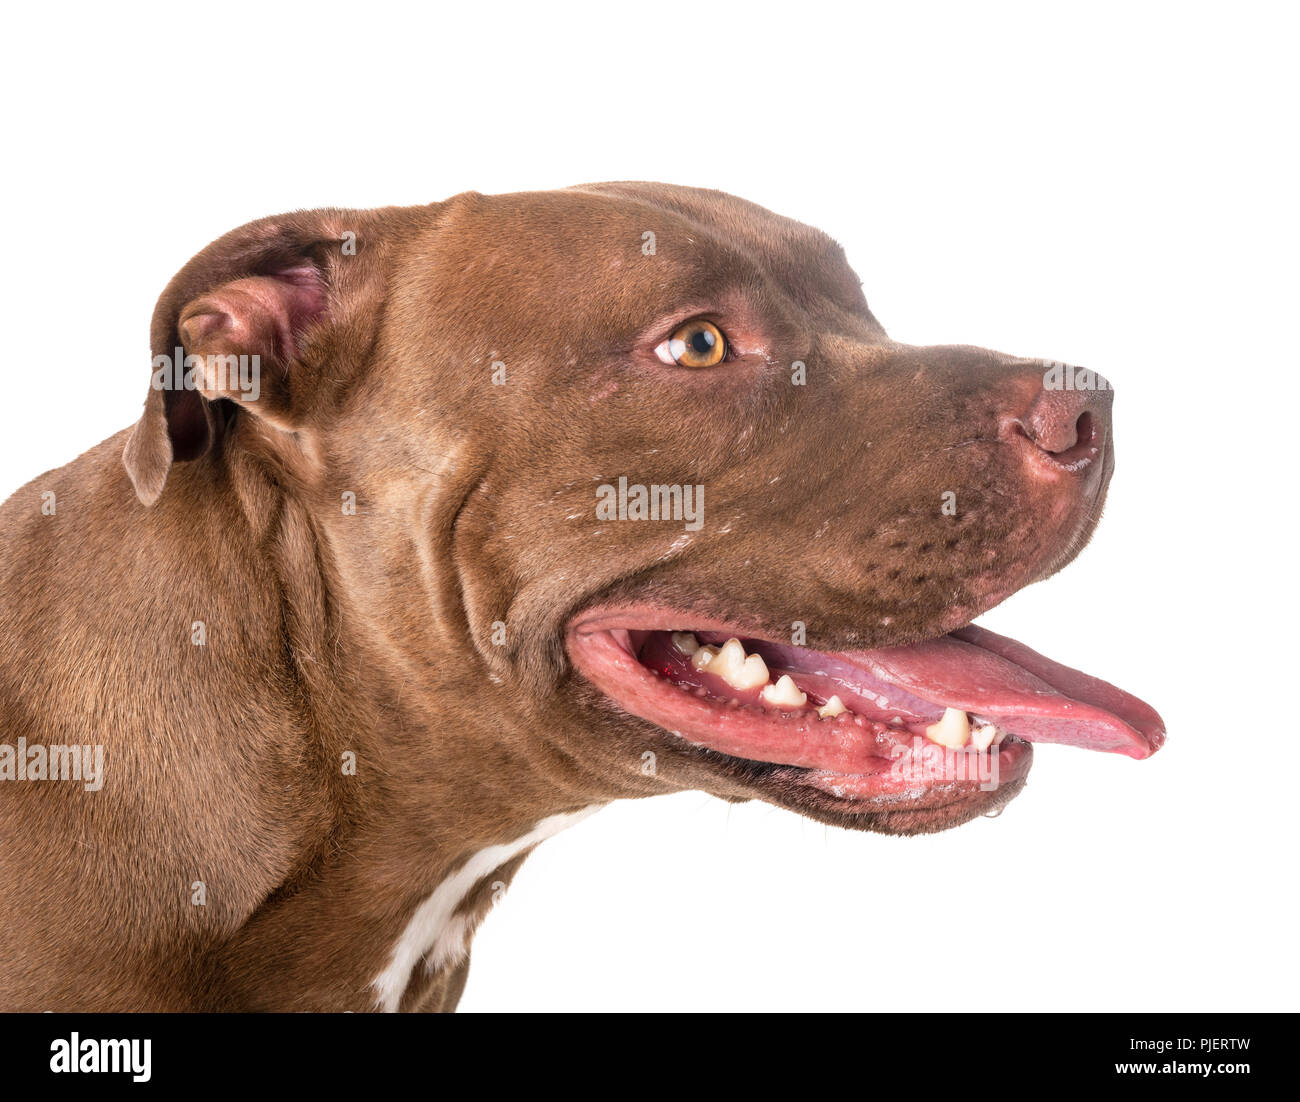 Pitbull red nose in front of white background Banque D'Images